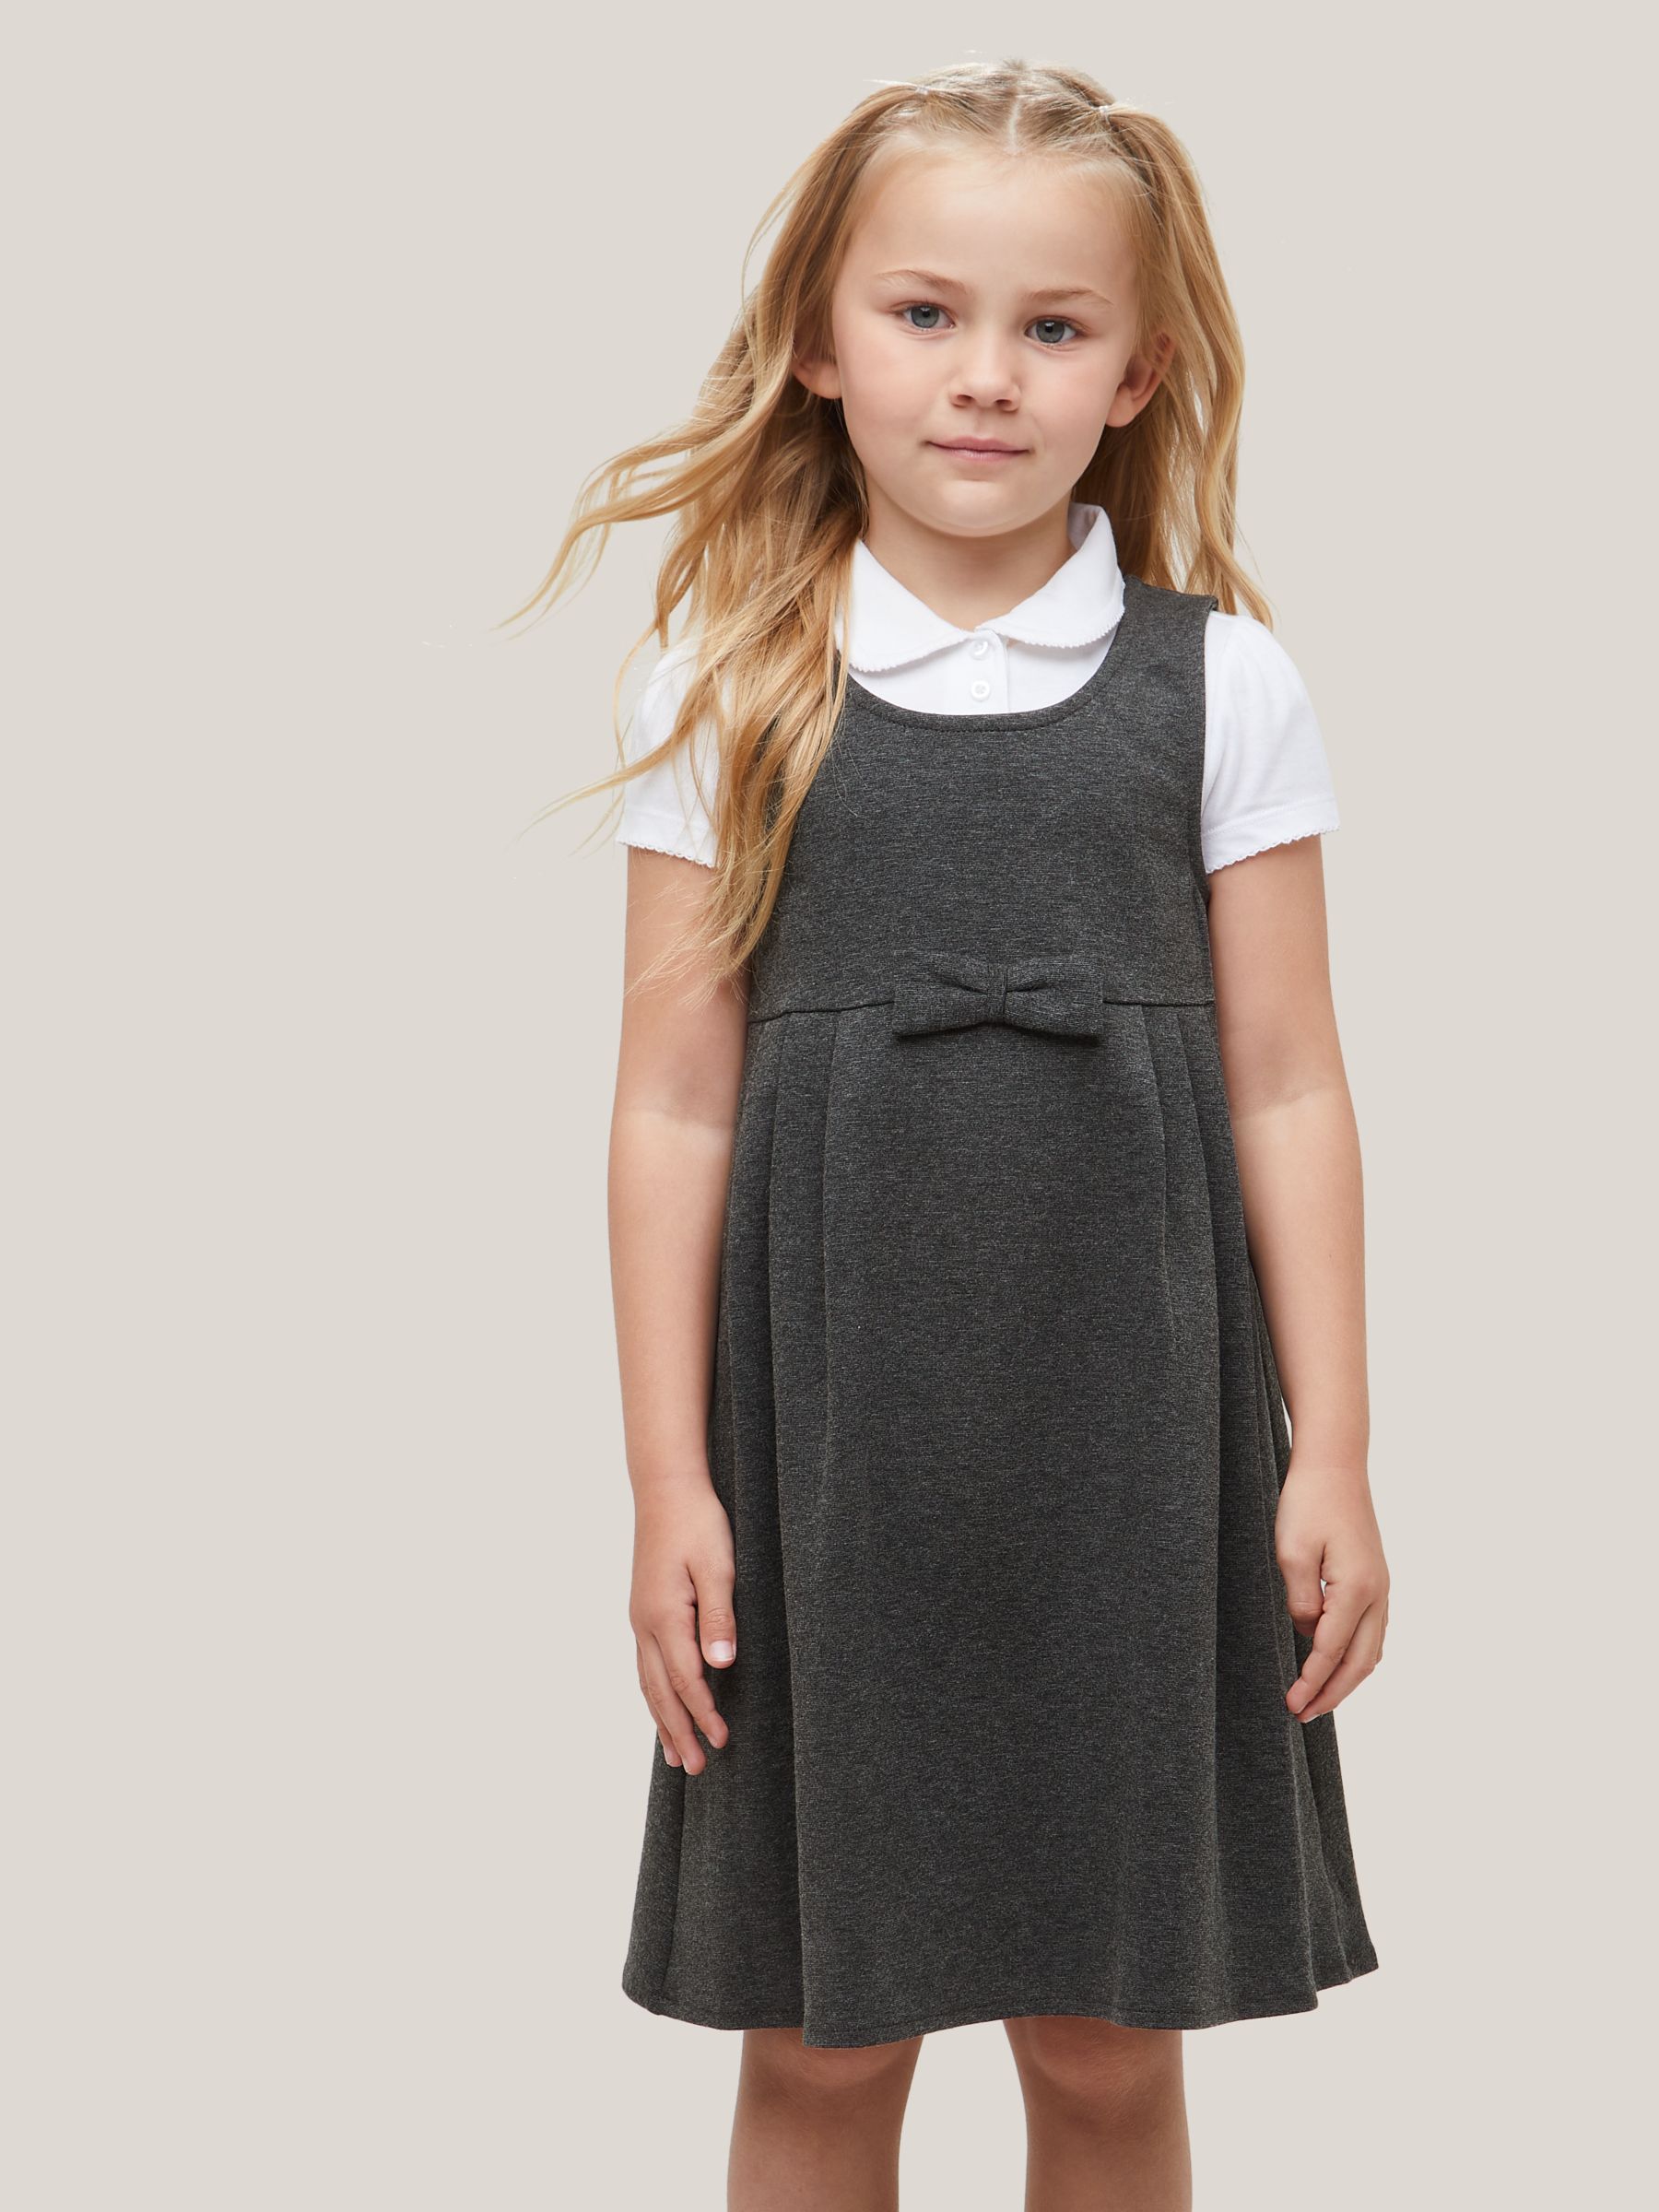 John Lewis Girls' Pleated School Tunic With Bow, Grey, 3 years